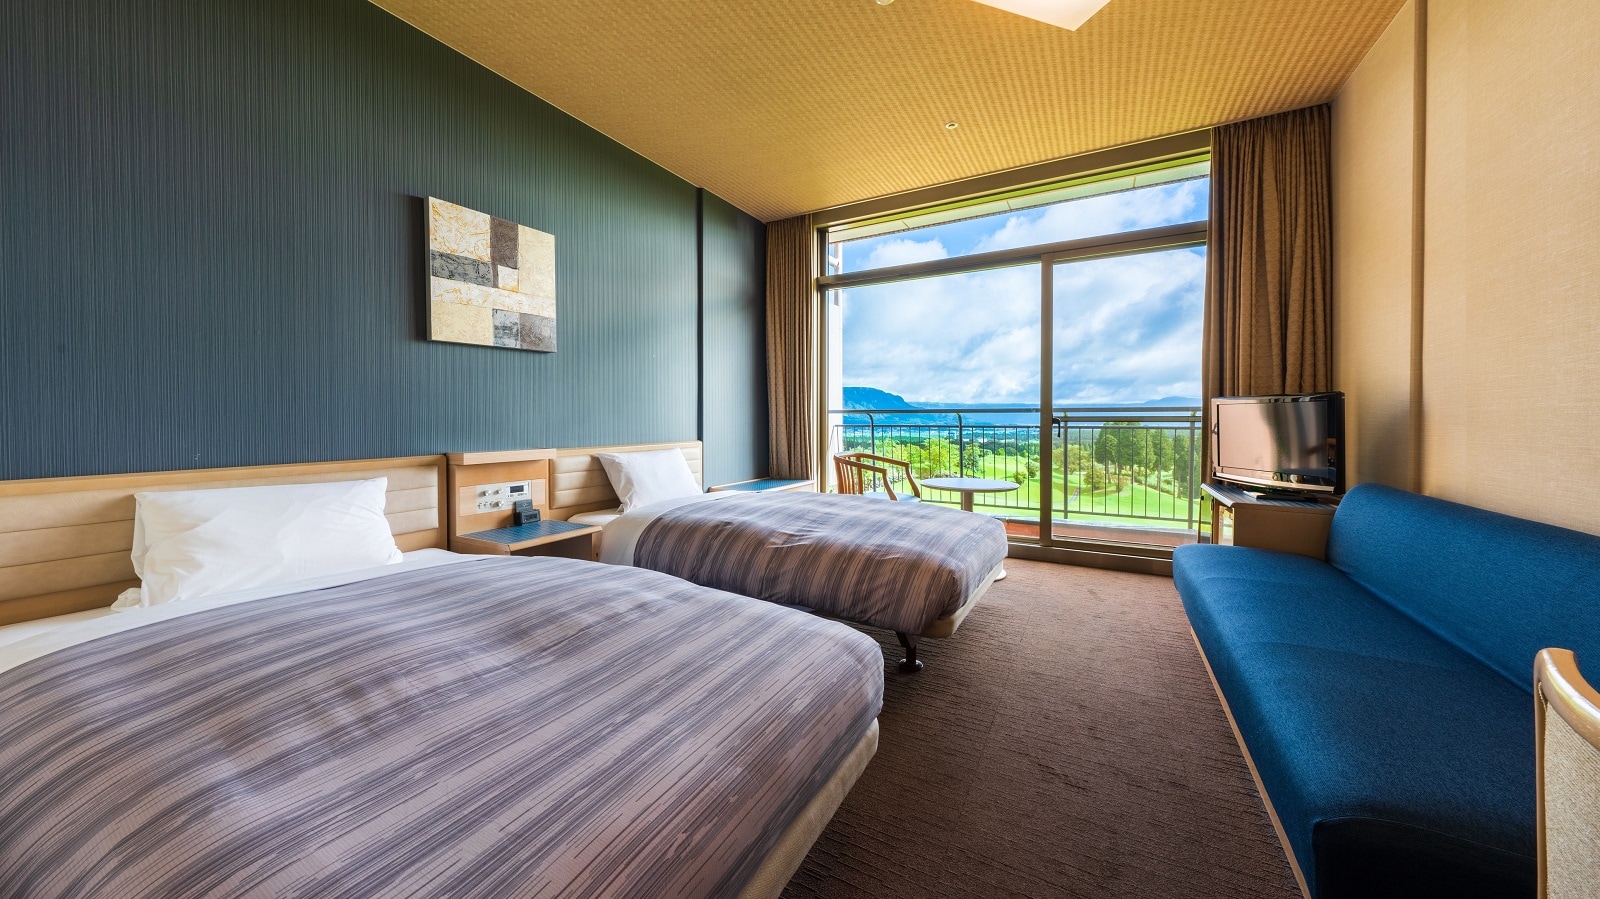 <Guest Room A> Twin Room A - You can enjoy the majestic view of the somma from the balcony on the somma side.